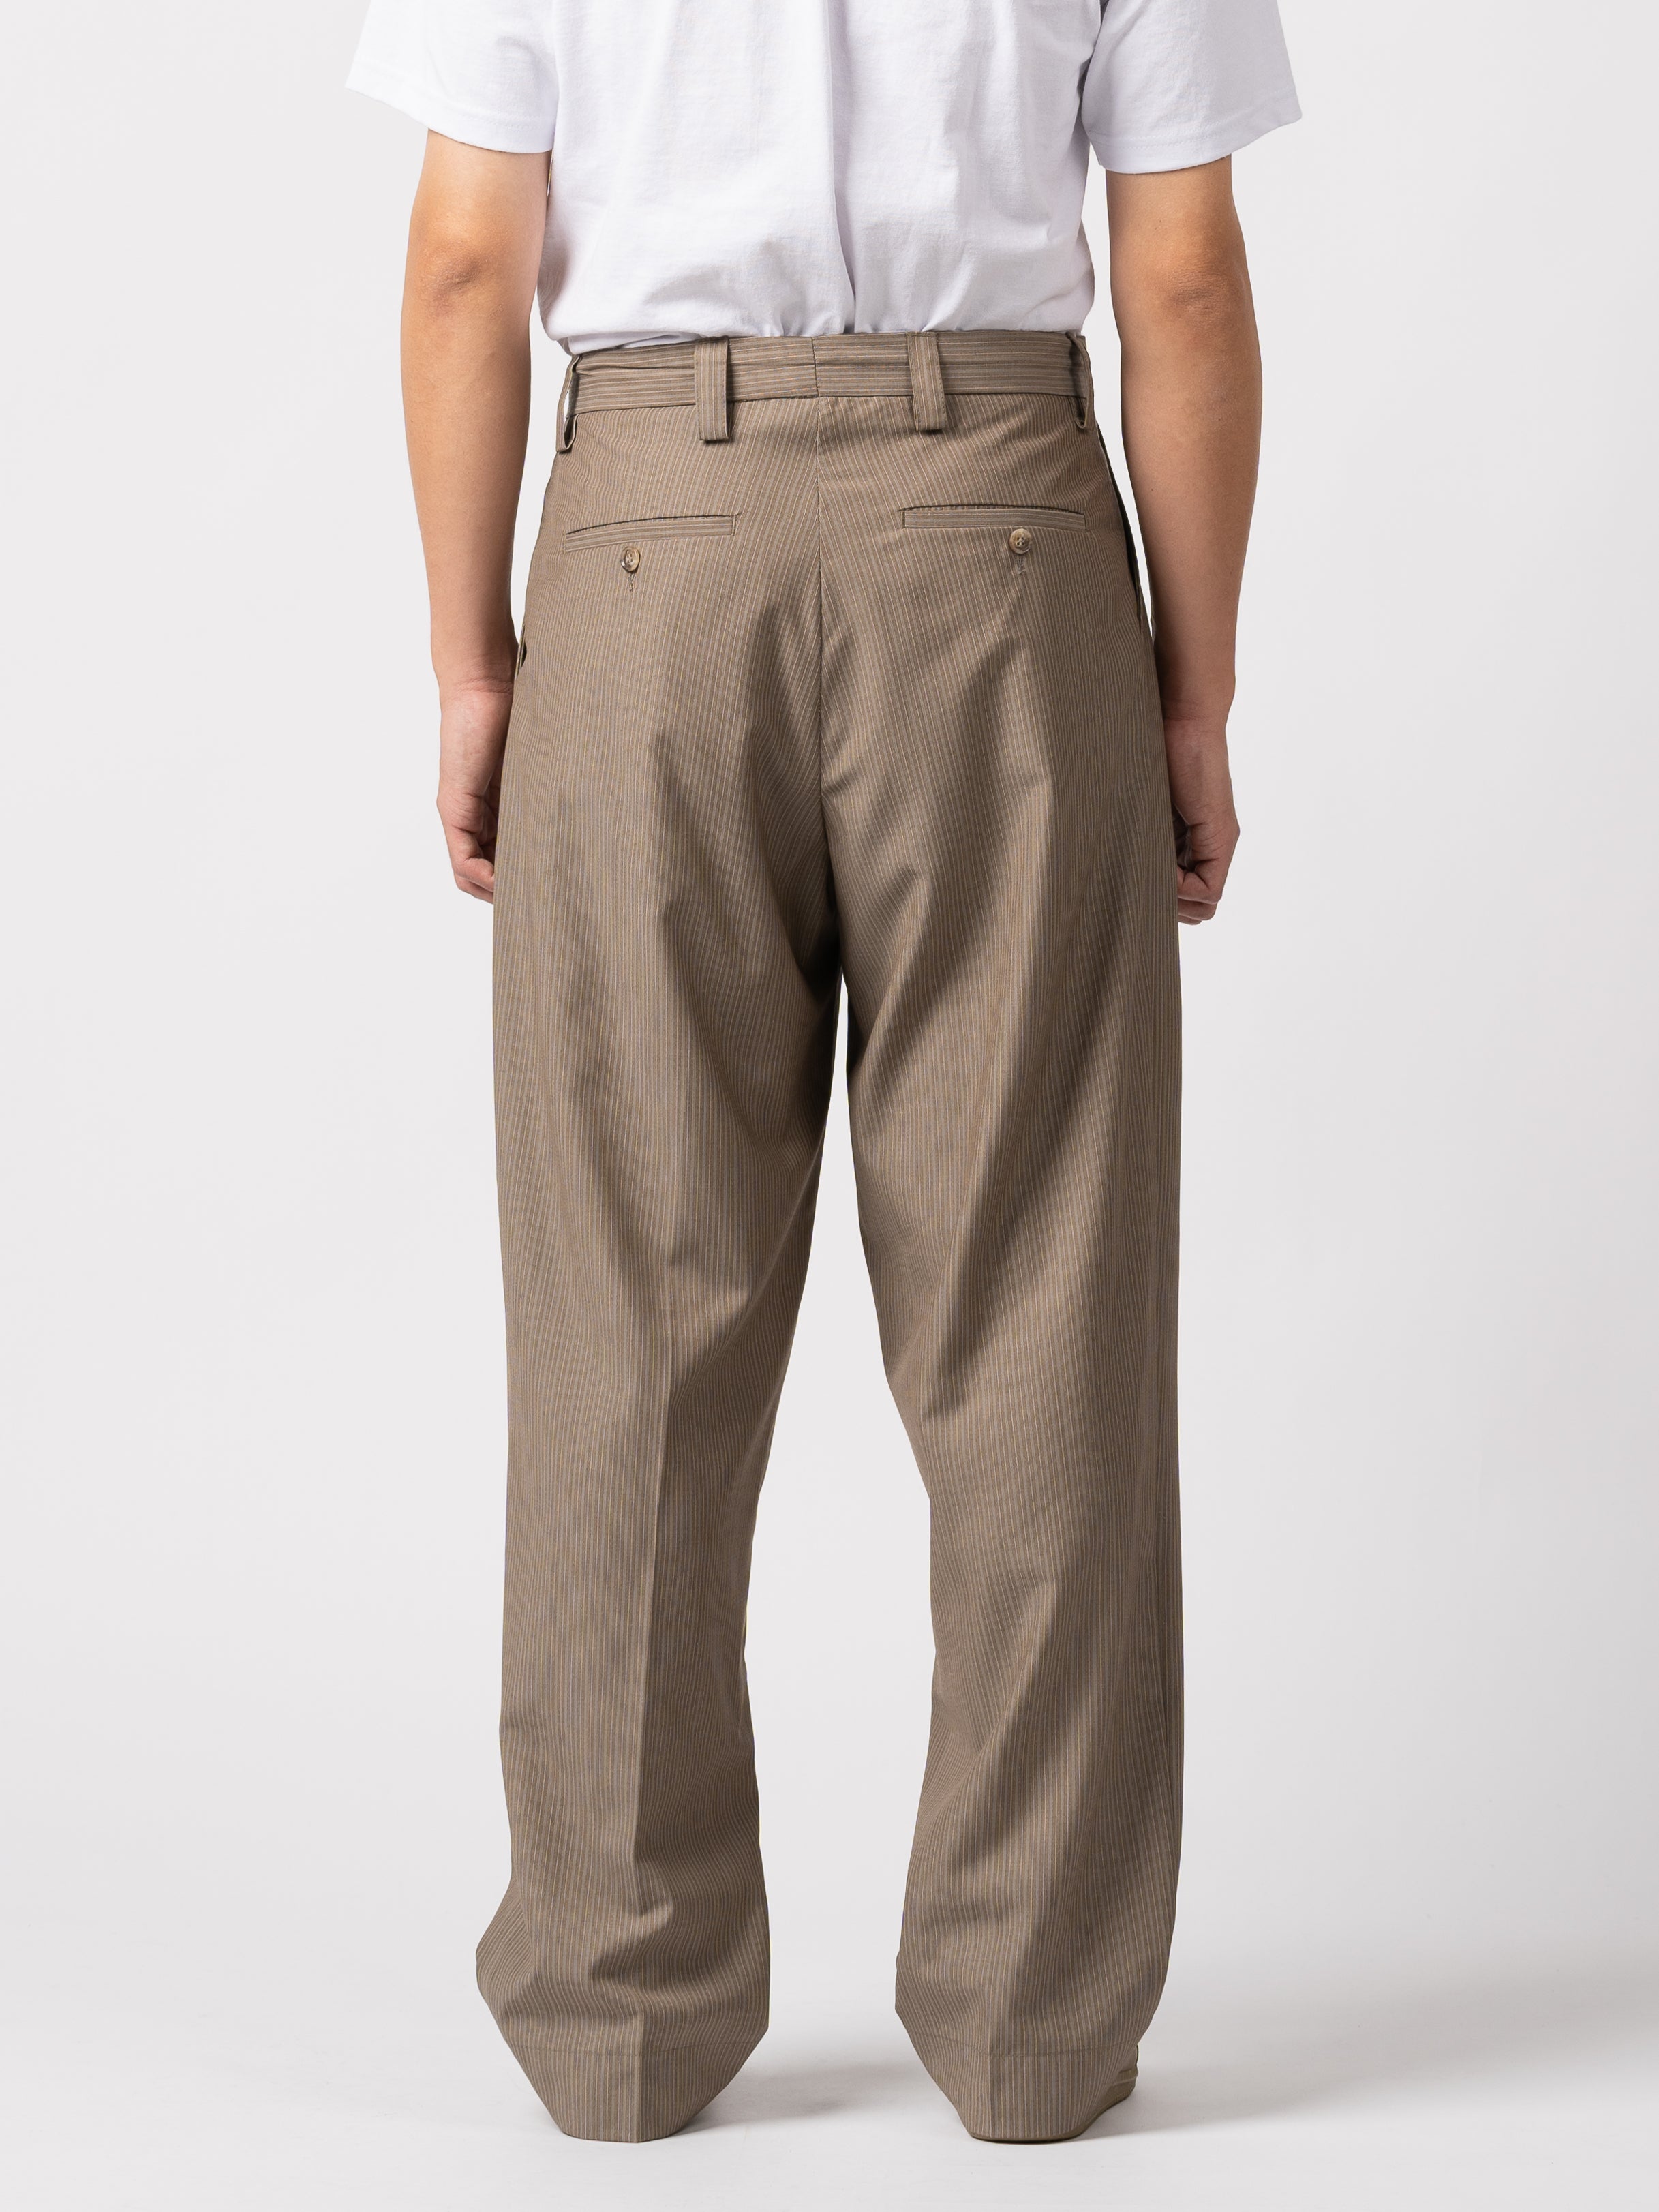 mfpen Classic Trousers (Taupe Grey Stripe)